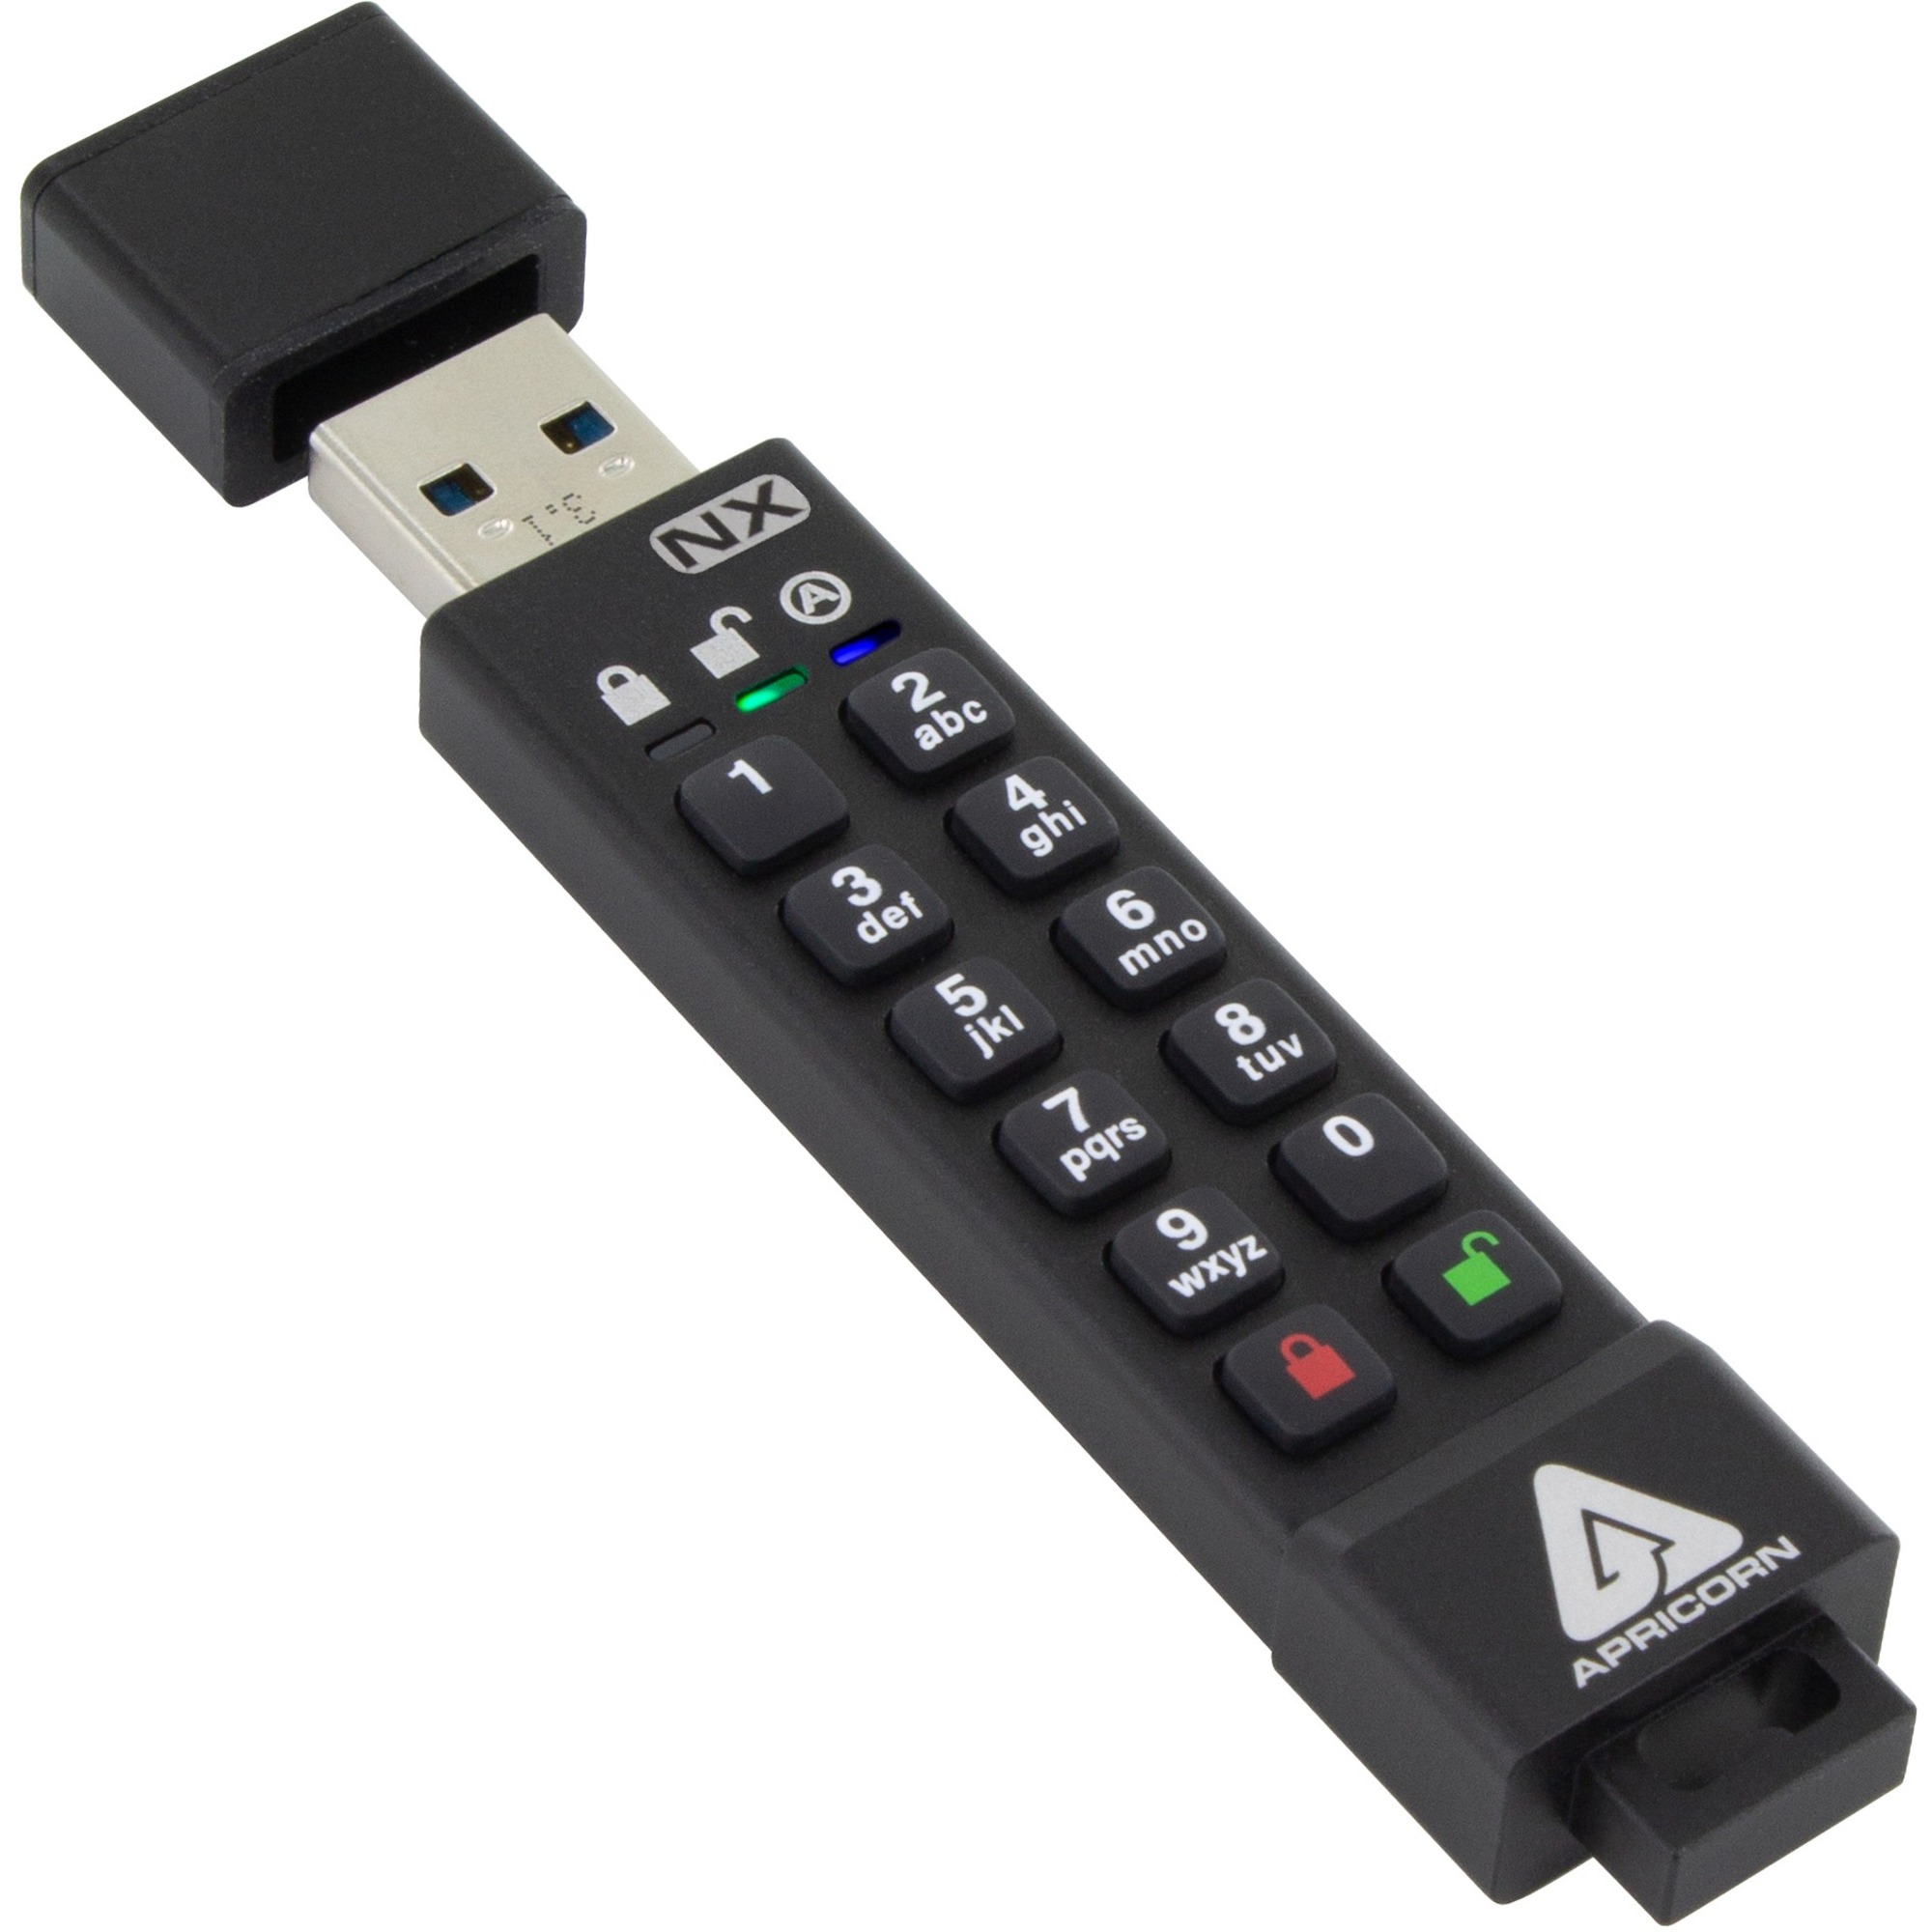 skelet motor Styrke Apricon Aegis Secure Key 3NX: Software-Free 256-Bit AES XTS Encrypted USB  3.1 Flash Key with FIPS 140-2 level 3 validation, Onboard Keypad, and up to  25% Cooler Operating Temperatures.